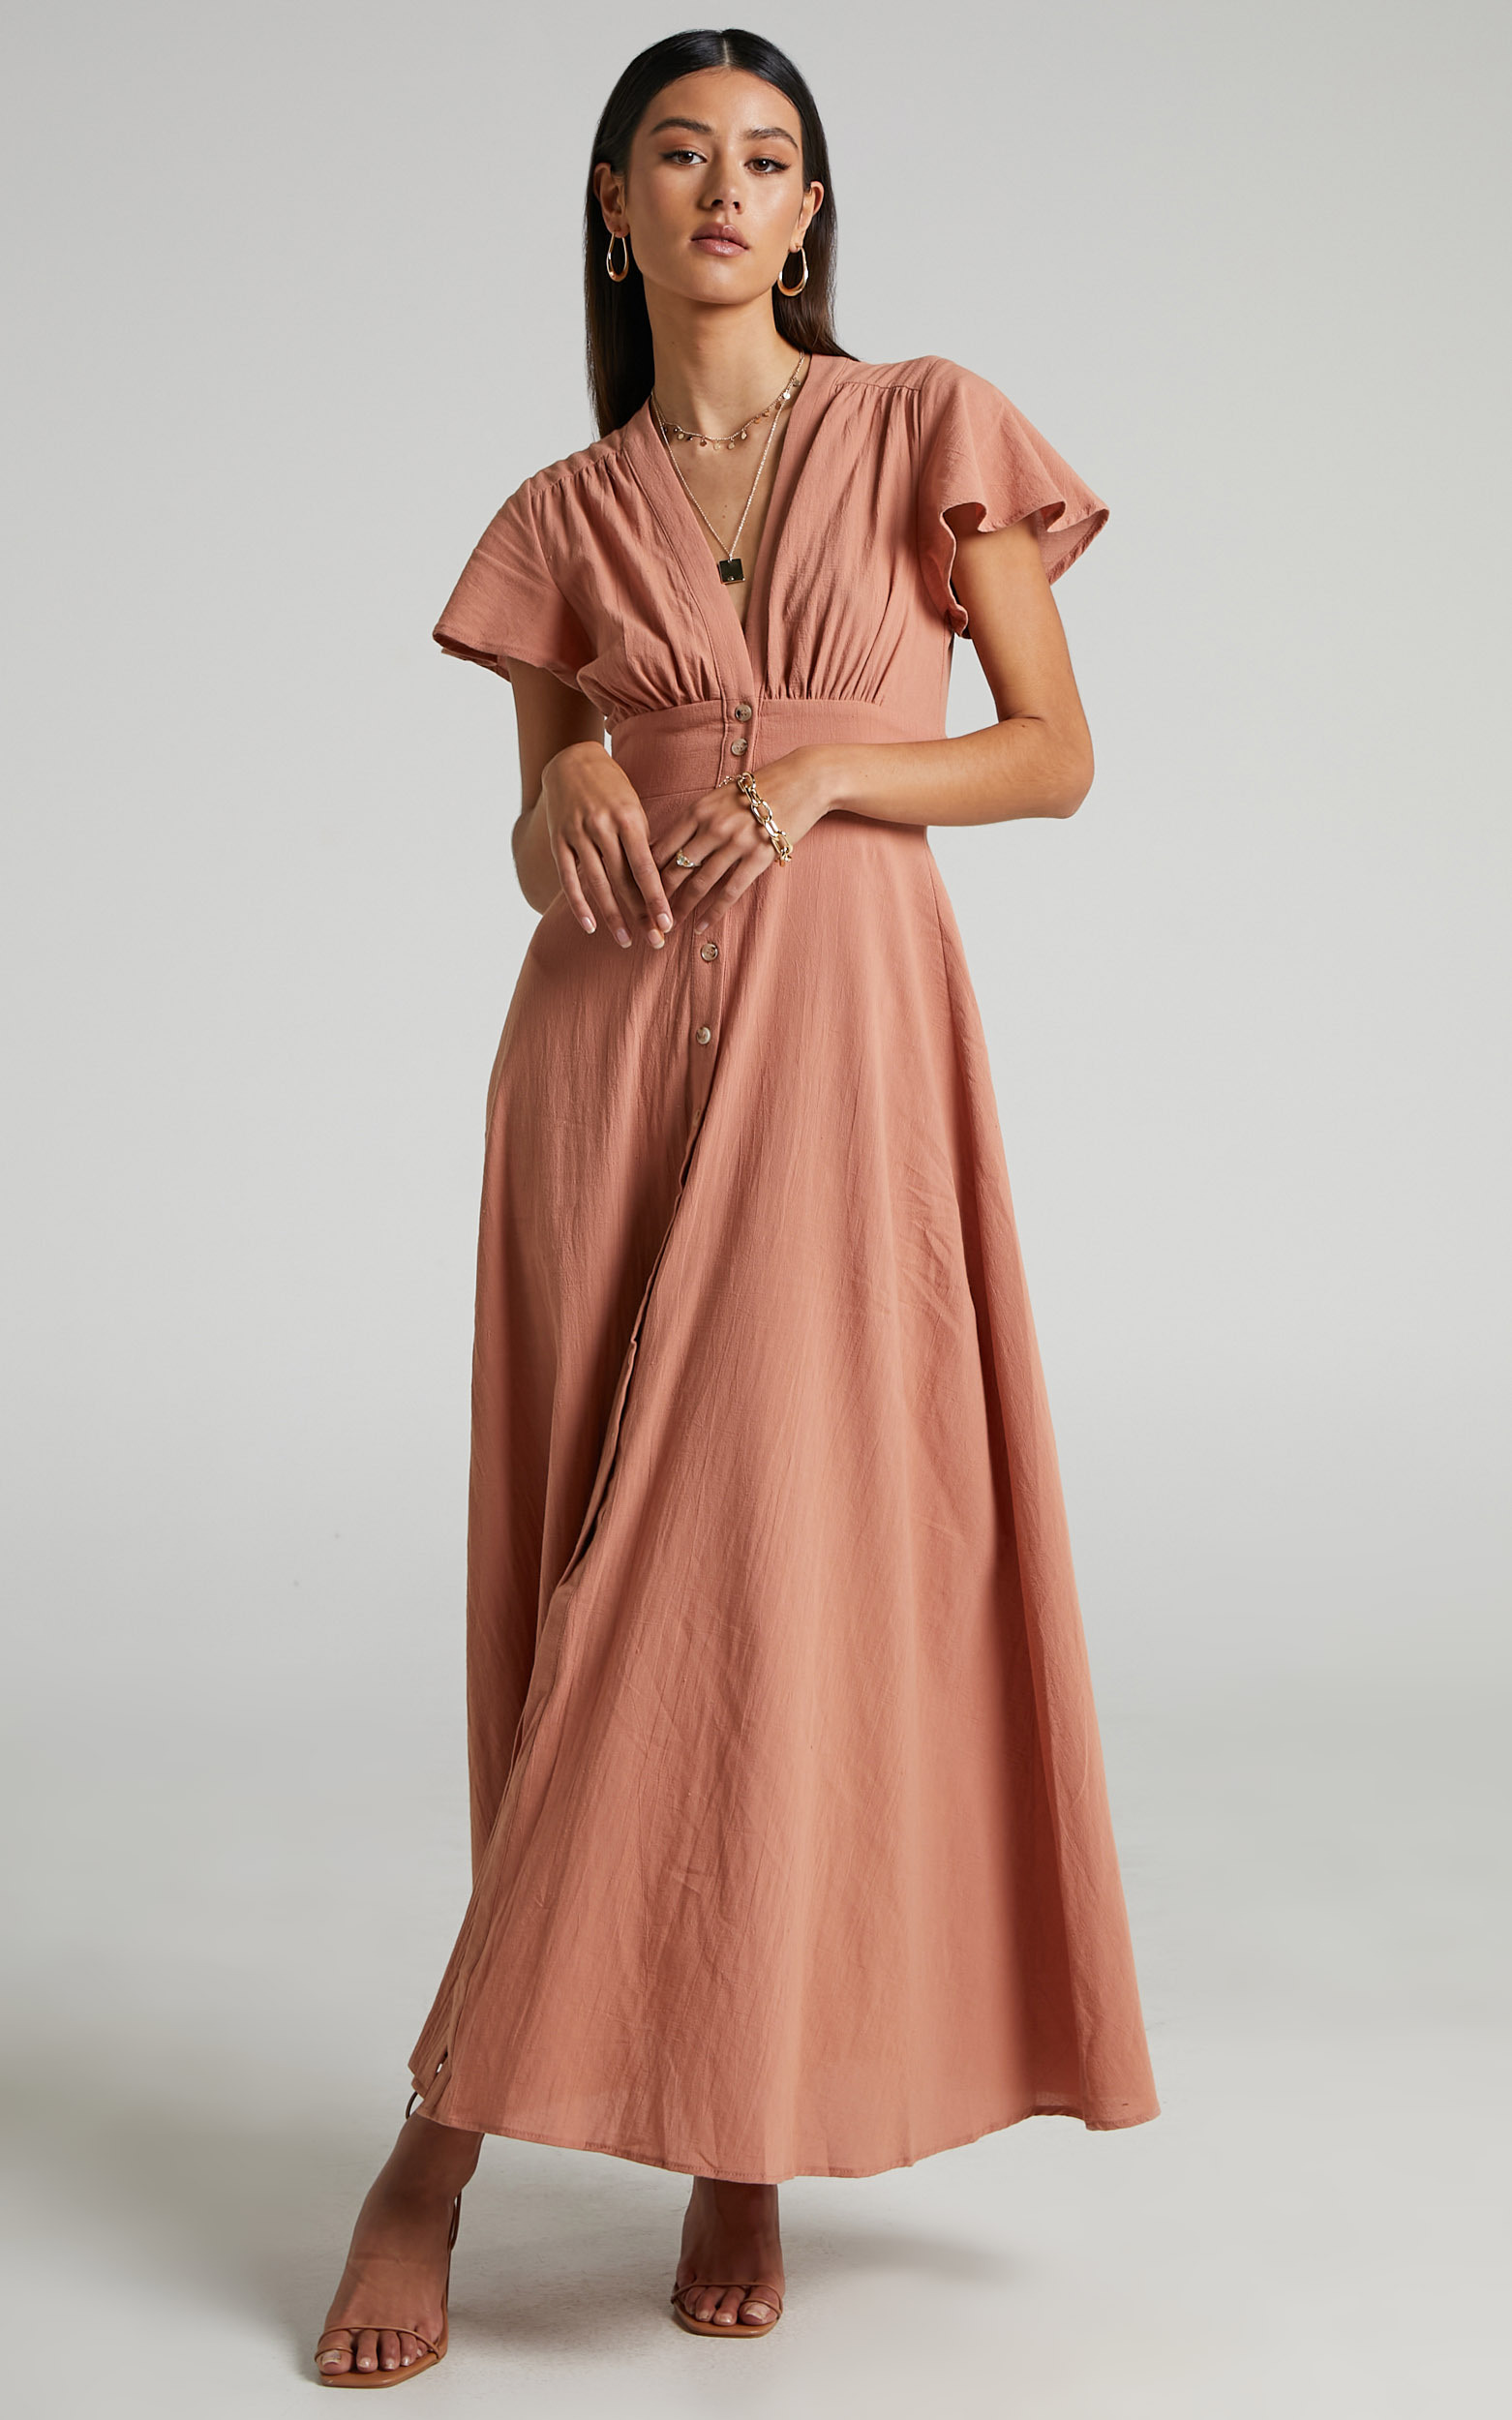 Elijah Empire Waist Button Down Maxi Dress in Rust - 06, BRN1, hi-res image number null